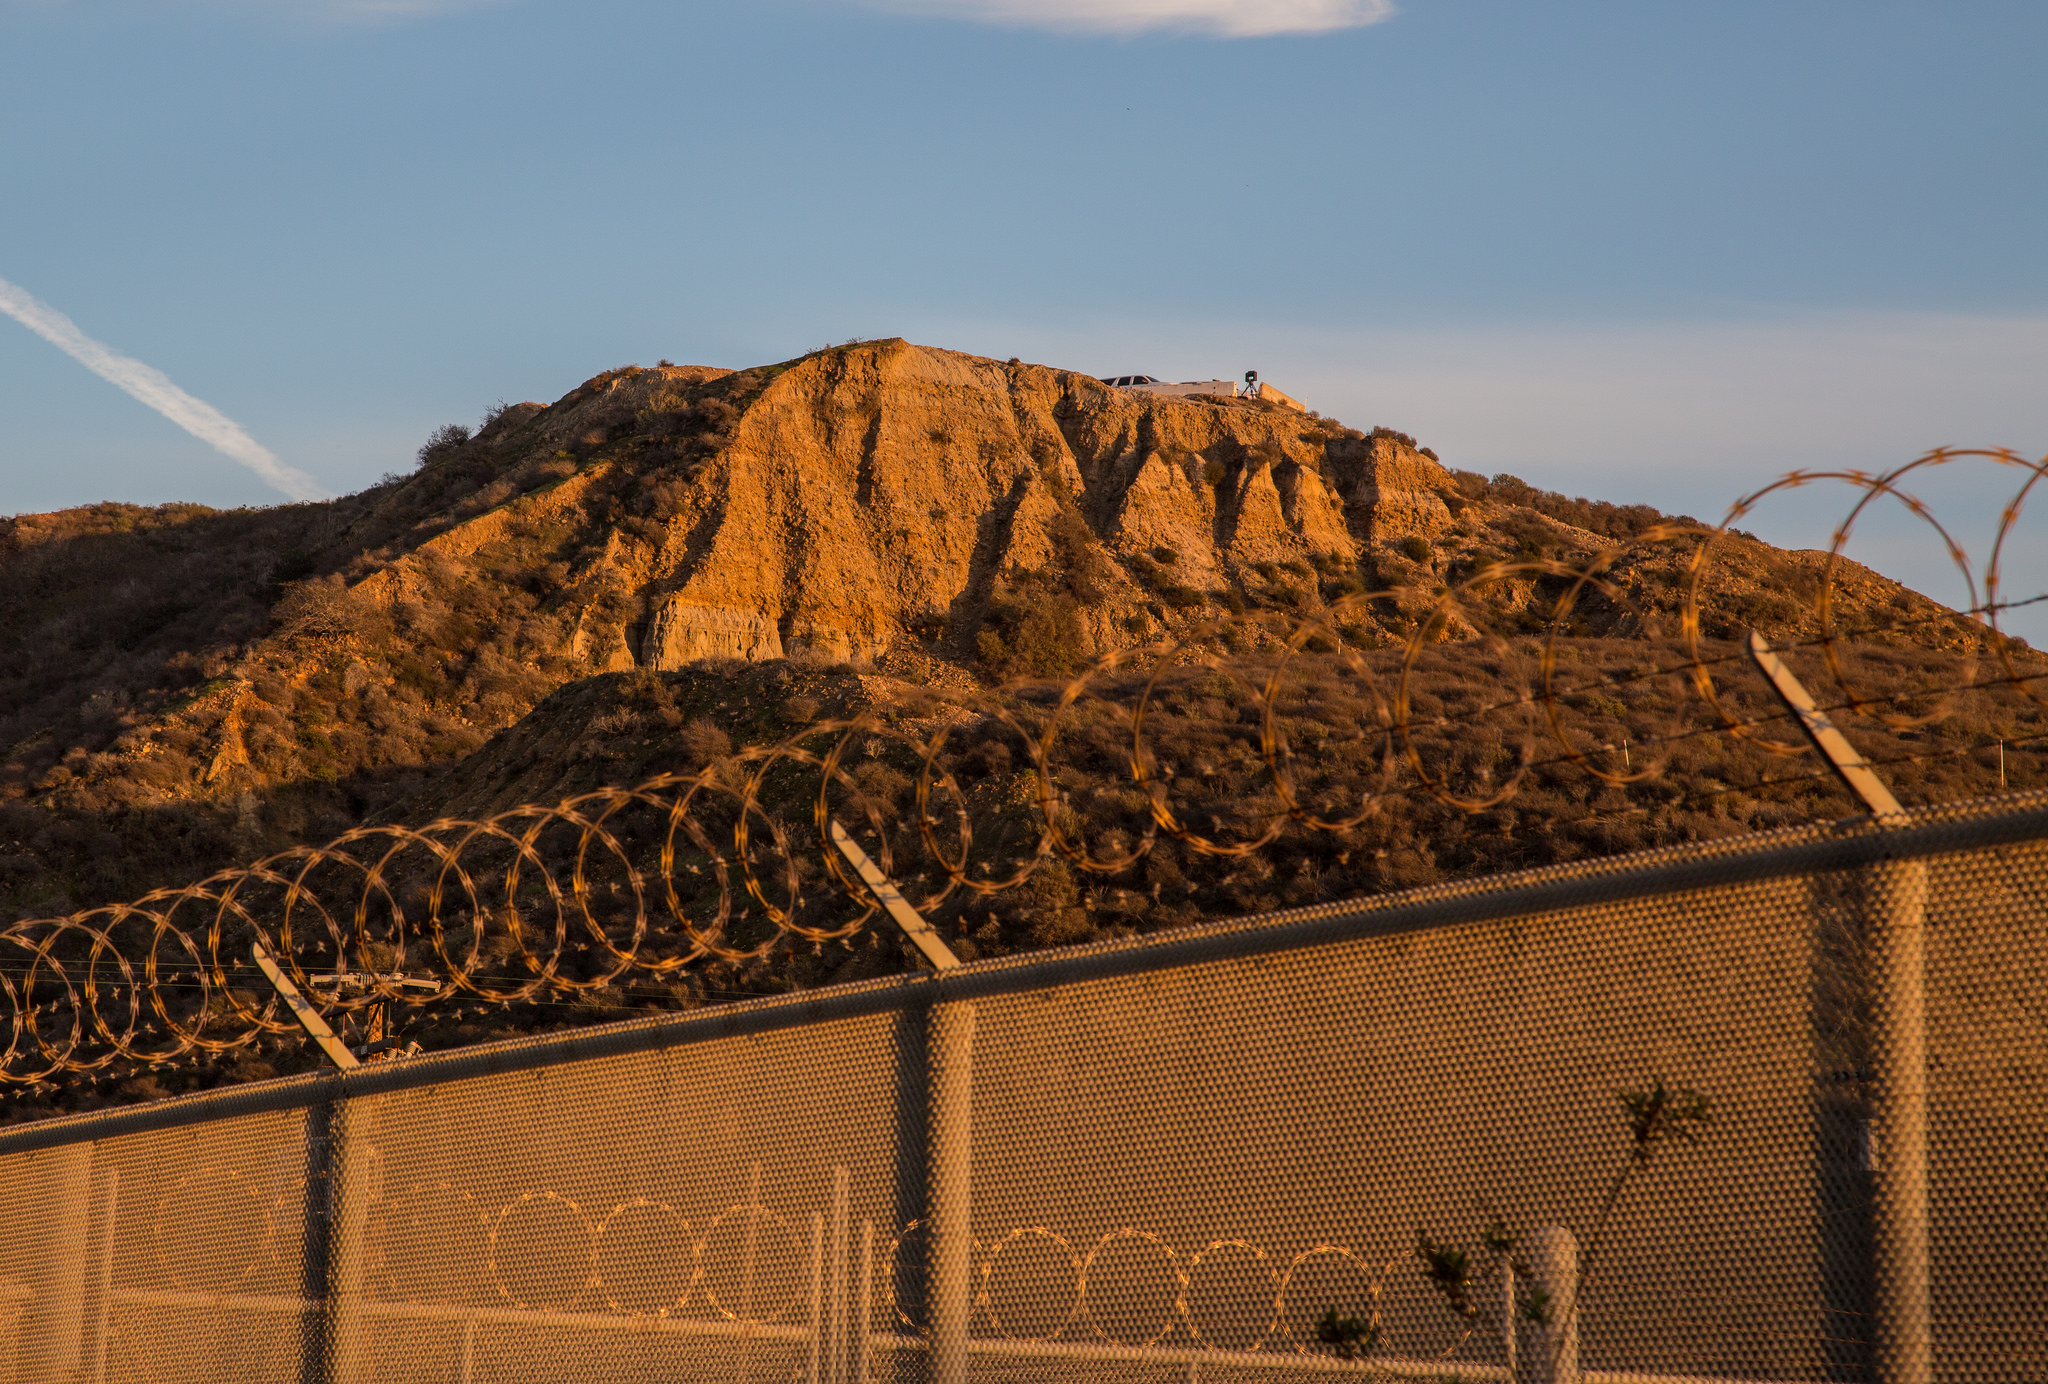 PHOTO: A barbed wire fence at the border between U.S. and Mexico. Photo by Tony Webster